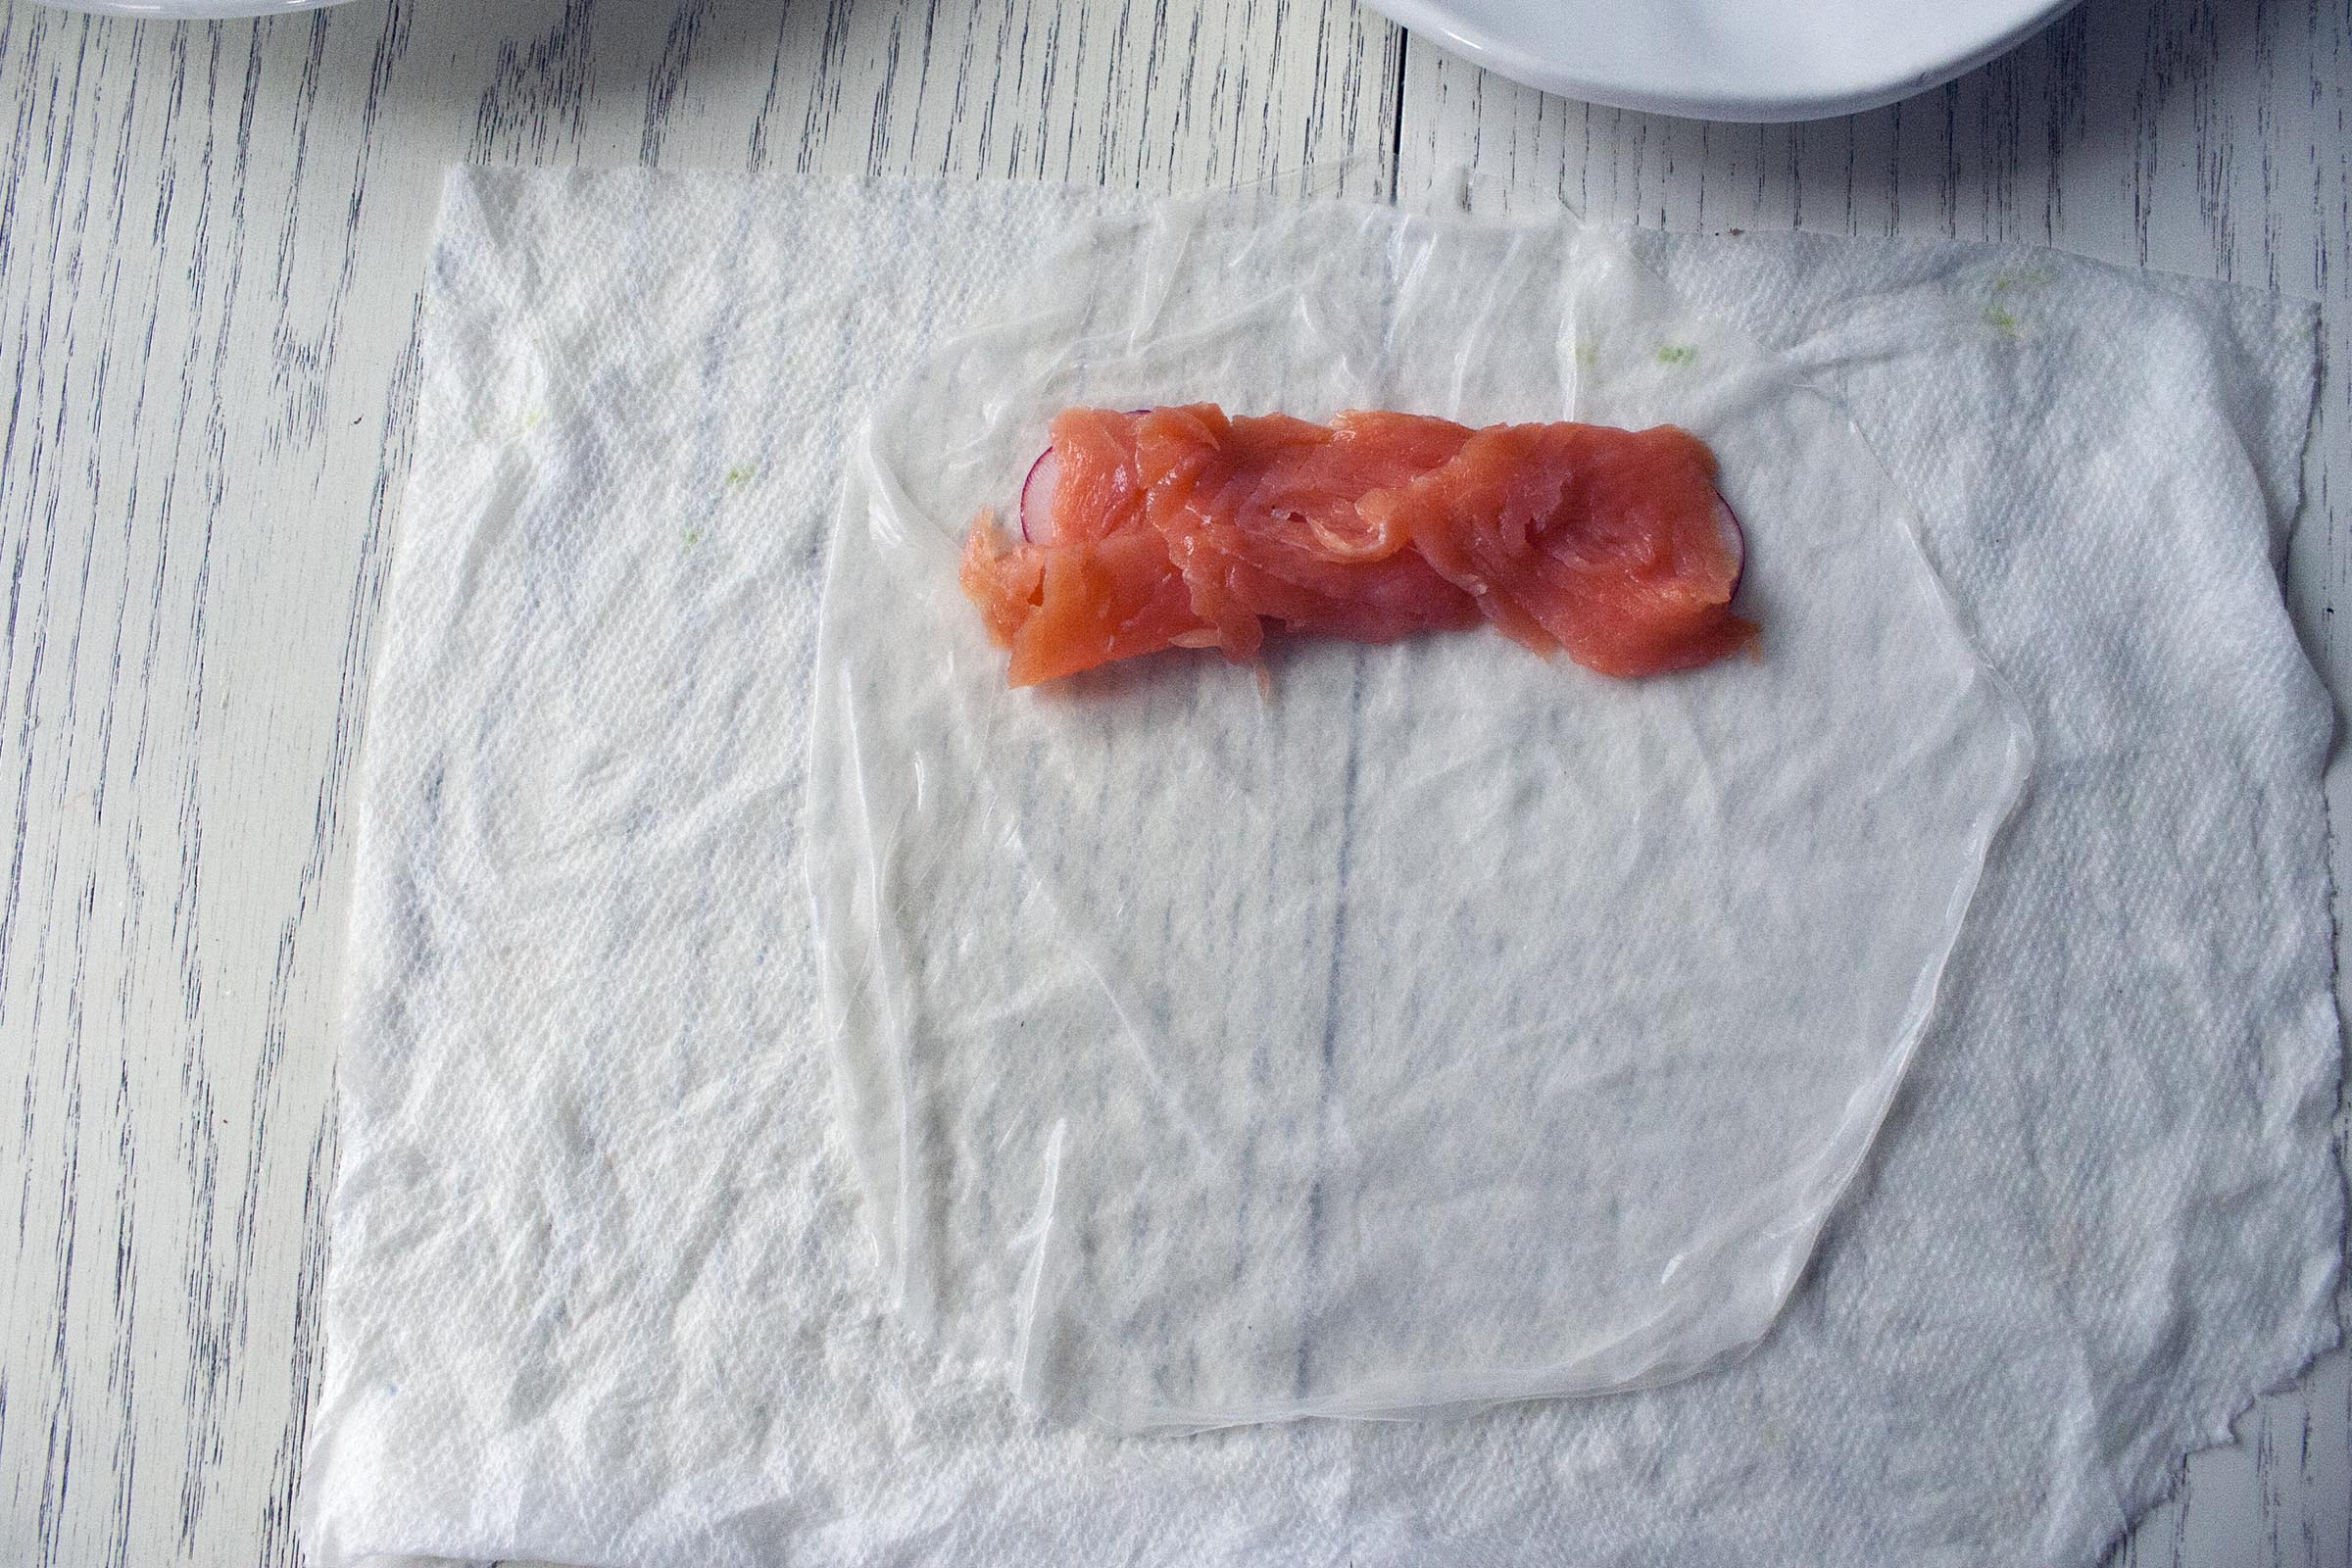 Assembling the Avocado and Smoked Salmon Summer Roll